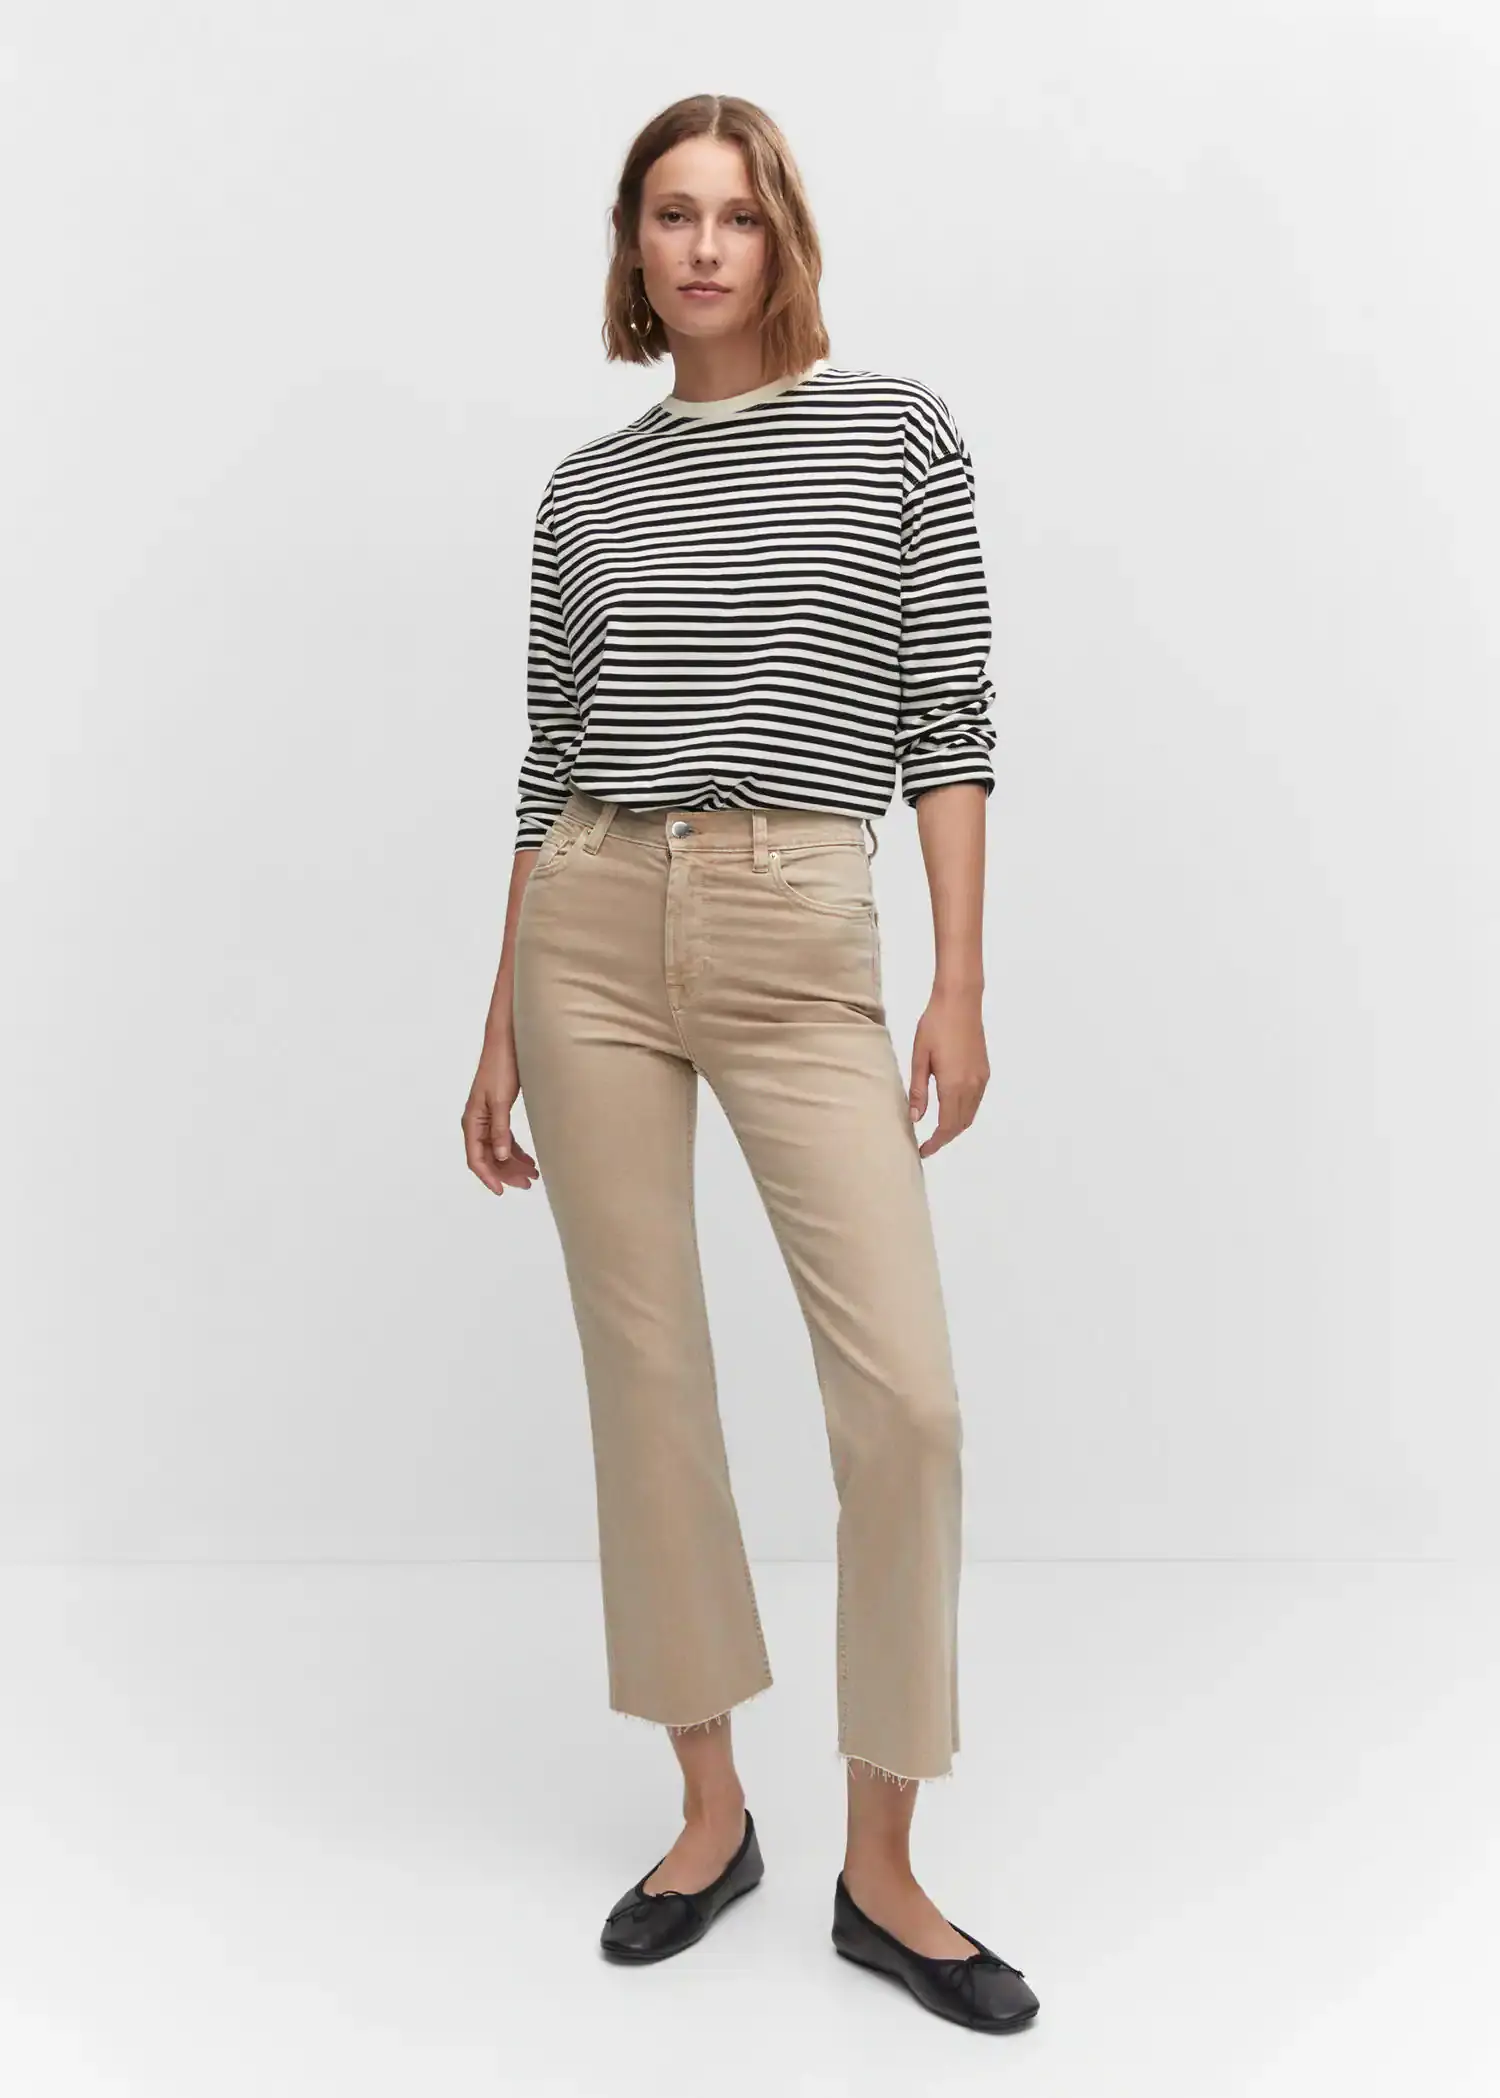 Mango Crop flared jeans. a woman wearing a striped shirt and beige pants. 